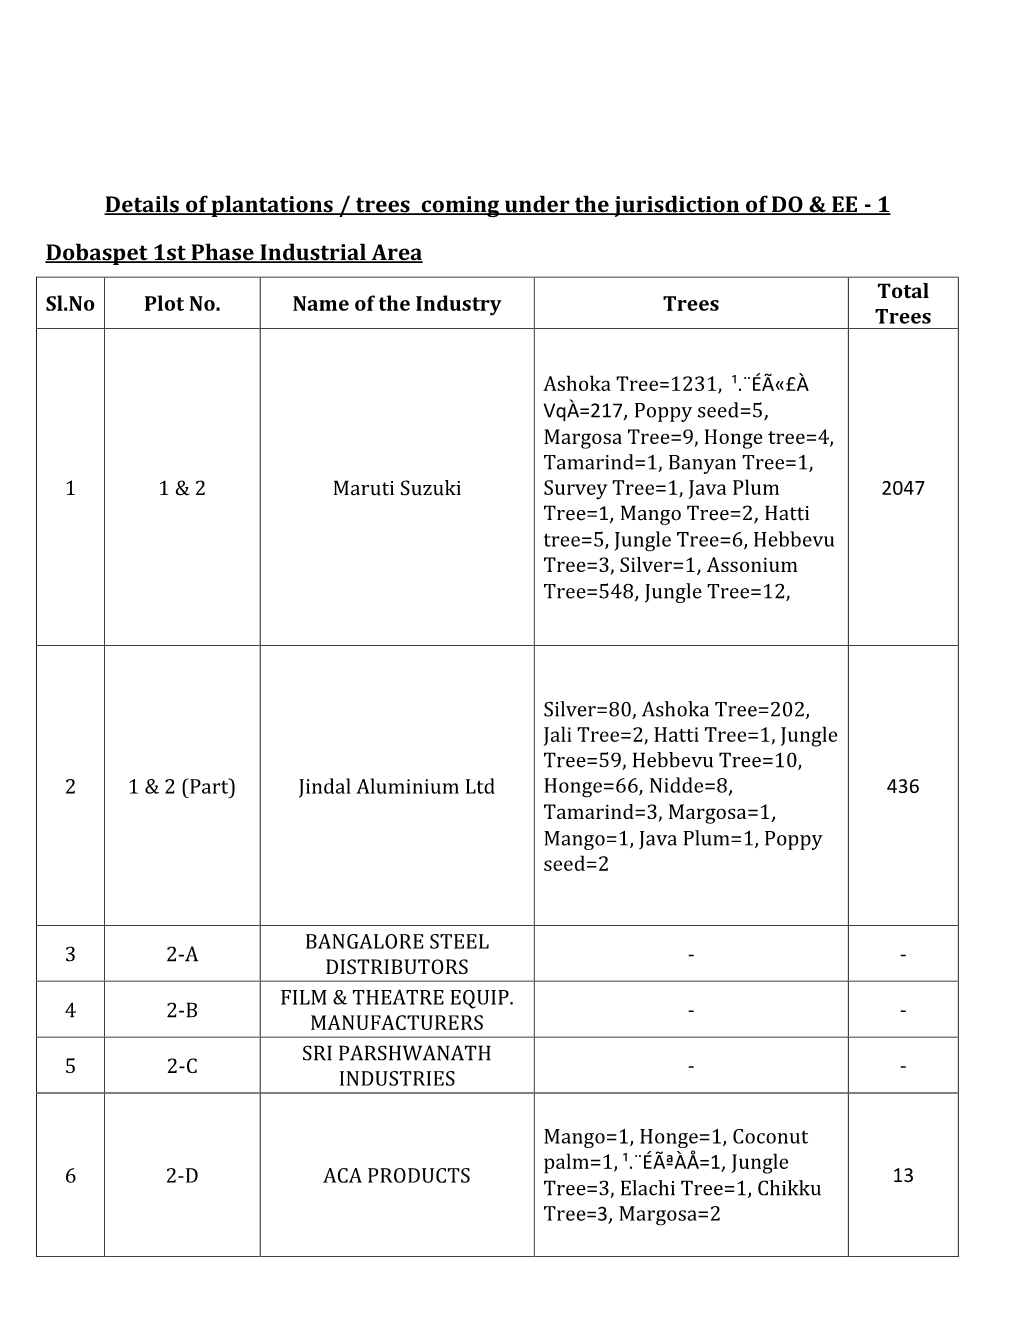 Details of Plantations / Trees Coming Under the Jurisdiction of DO & EE